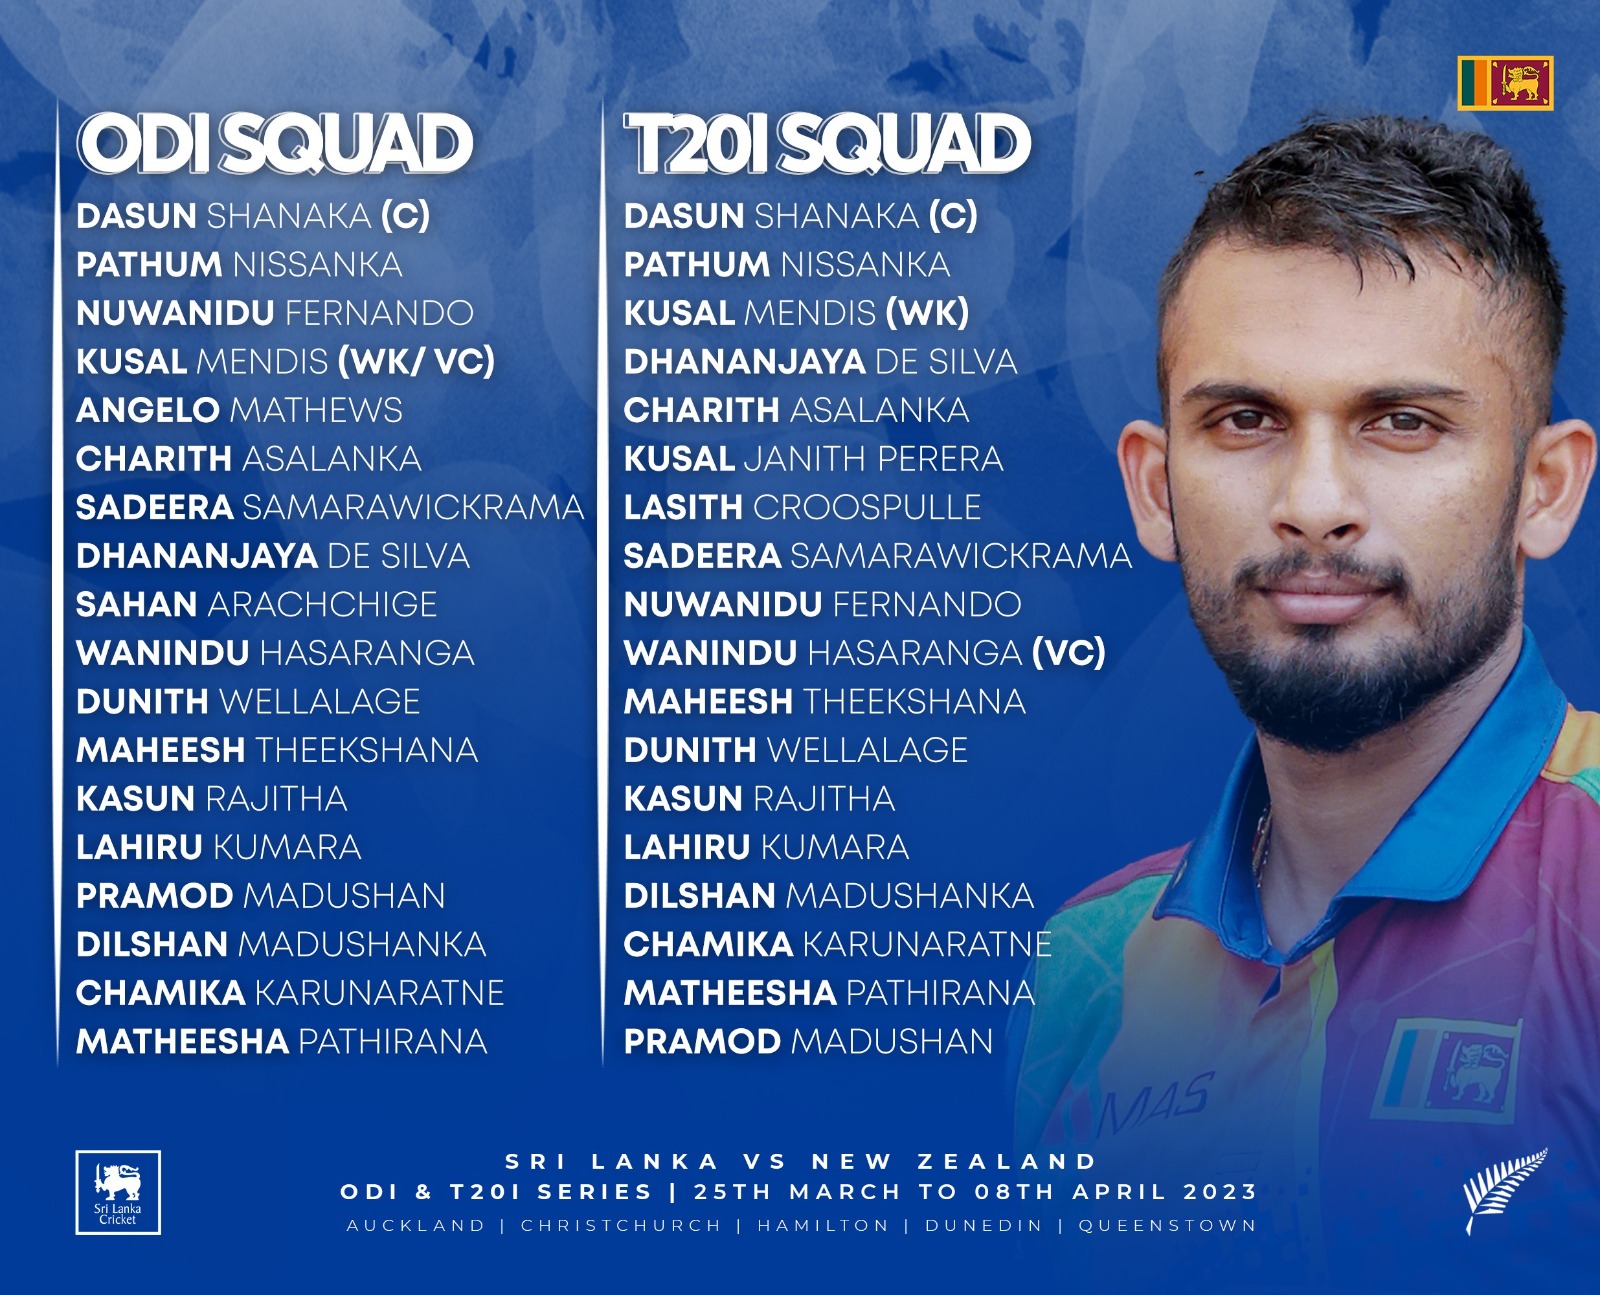 Sri Lanka squads to take part in T20I and ODI series against New Zealand